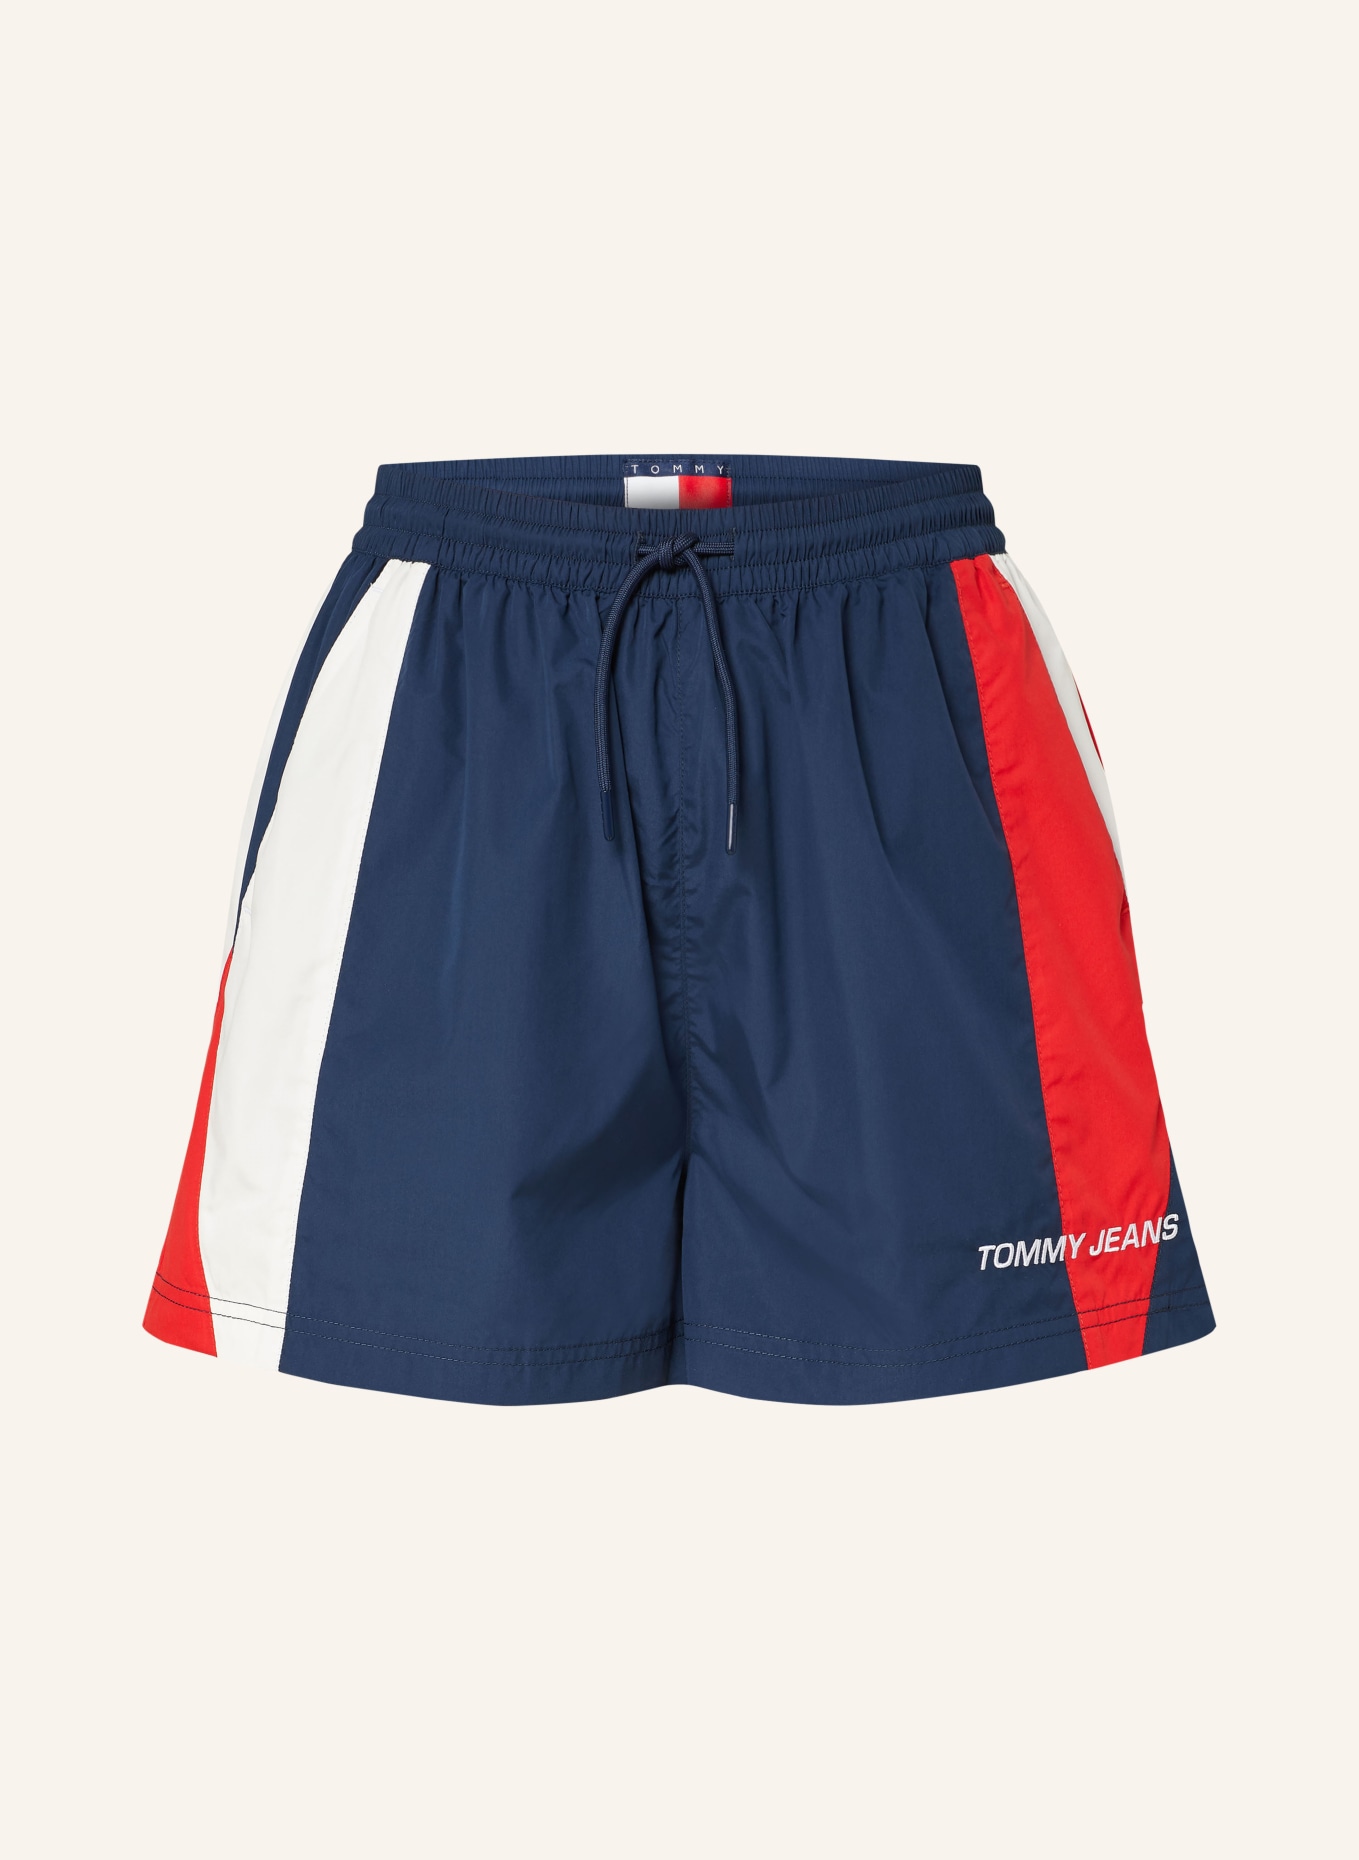 TOMMY JEANS Shorts, Farbe: DUNKELBLAU/ WEISS/ ROT (Bild 1)